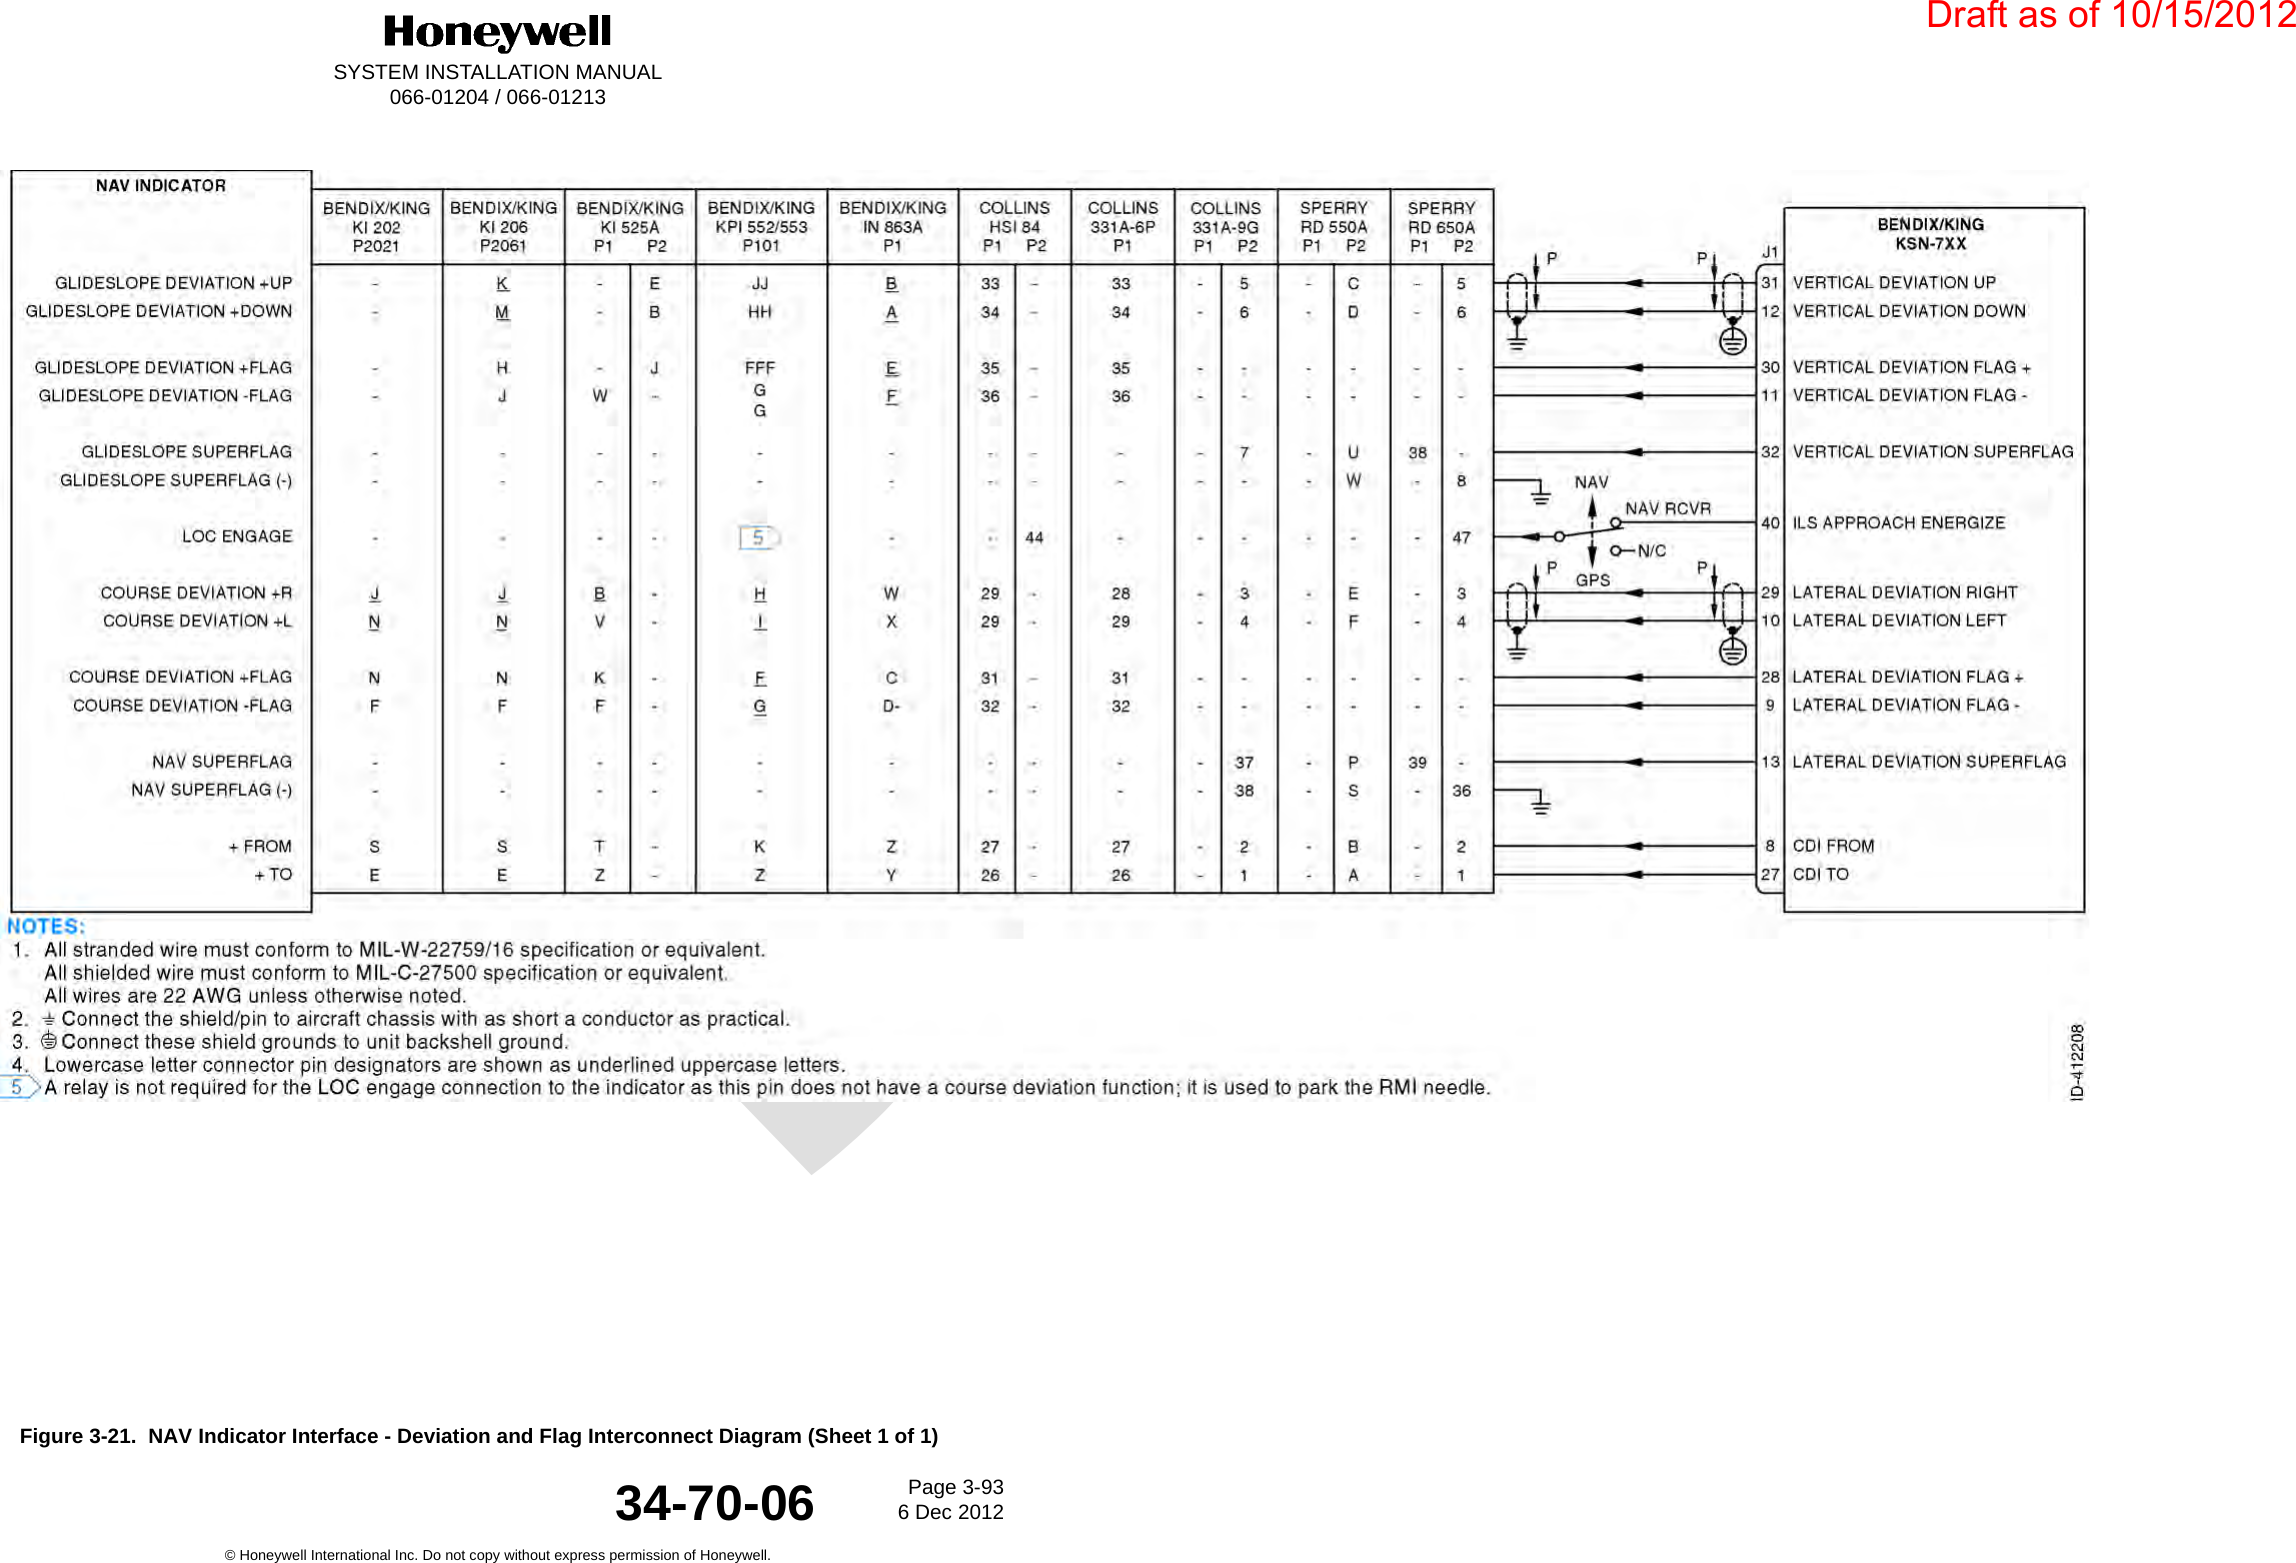 DraftSYSTEM INSTALLATION MANUAL066-01204 / 066-01213Page 3-936 Dec 2012© Honeywell International Inc. Do not copy without express permission of Honeywell.34-70-06Figure 3-21.  NAV Indicator Interface - Deviation and Flag Interconnect Diagram (Sheet 1 of 1)Draft as of 10/15/2012